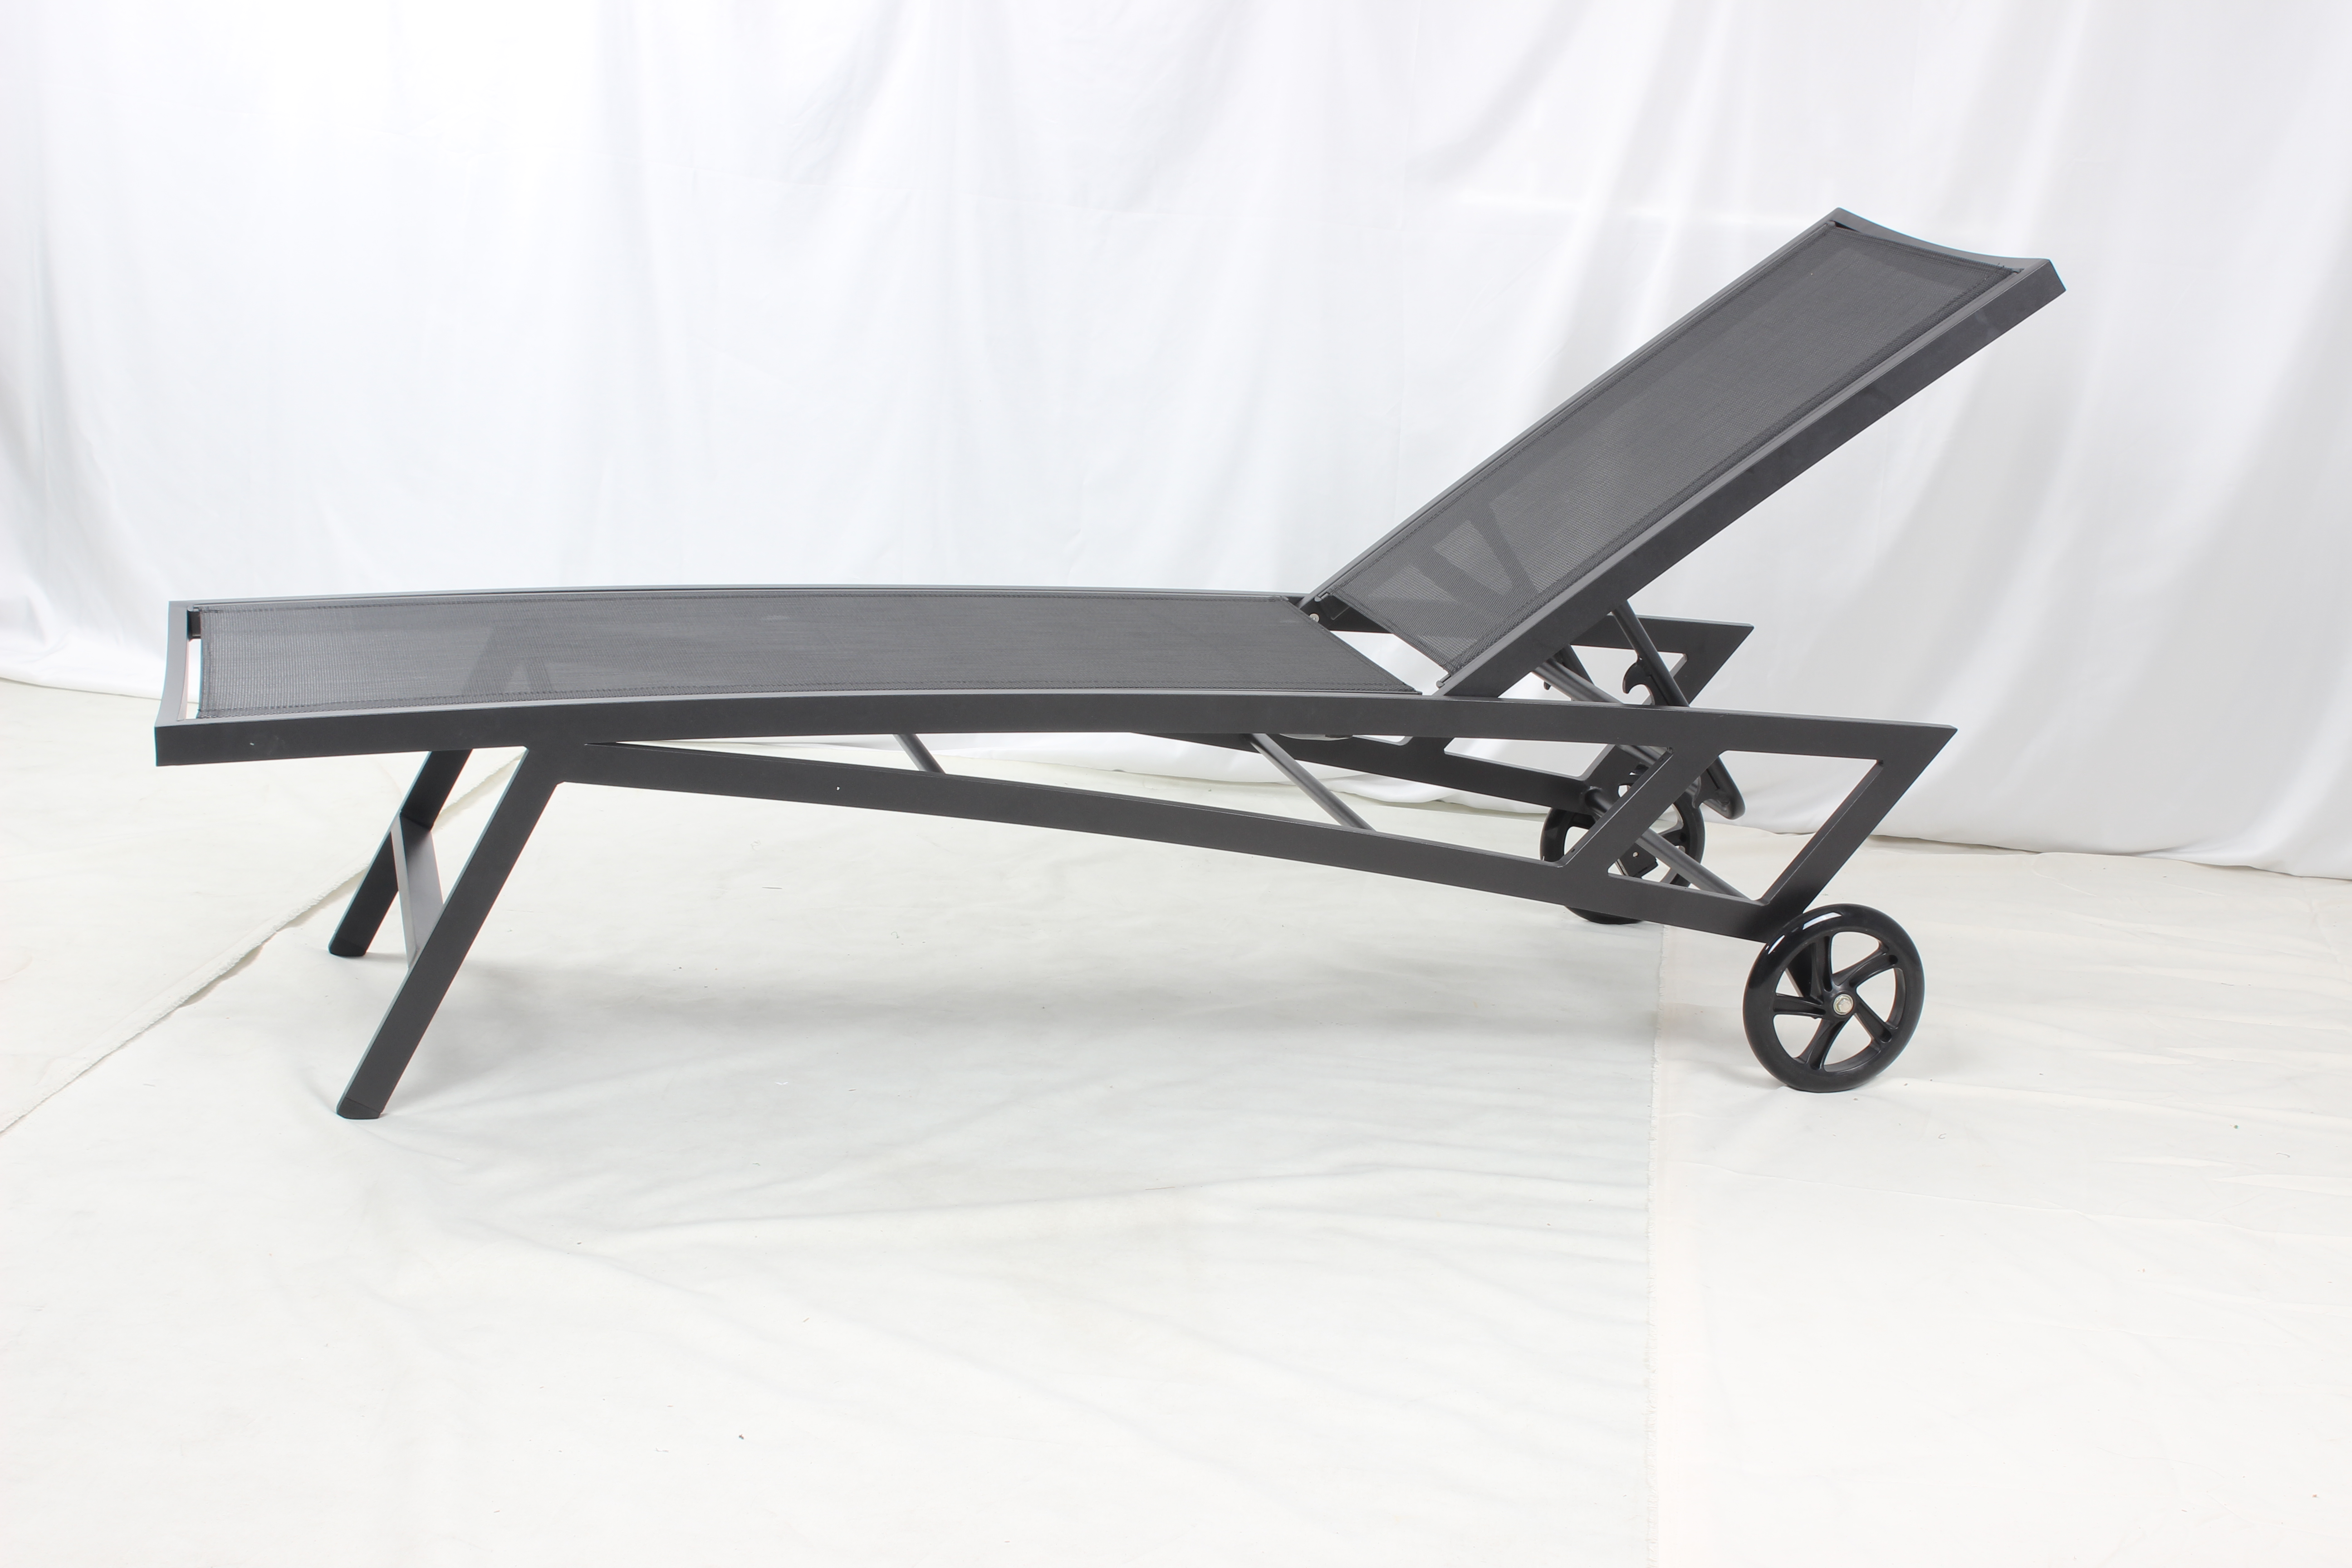 Black aluminum hotel pool chaise lounge chair